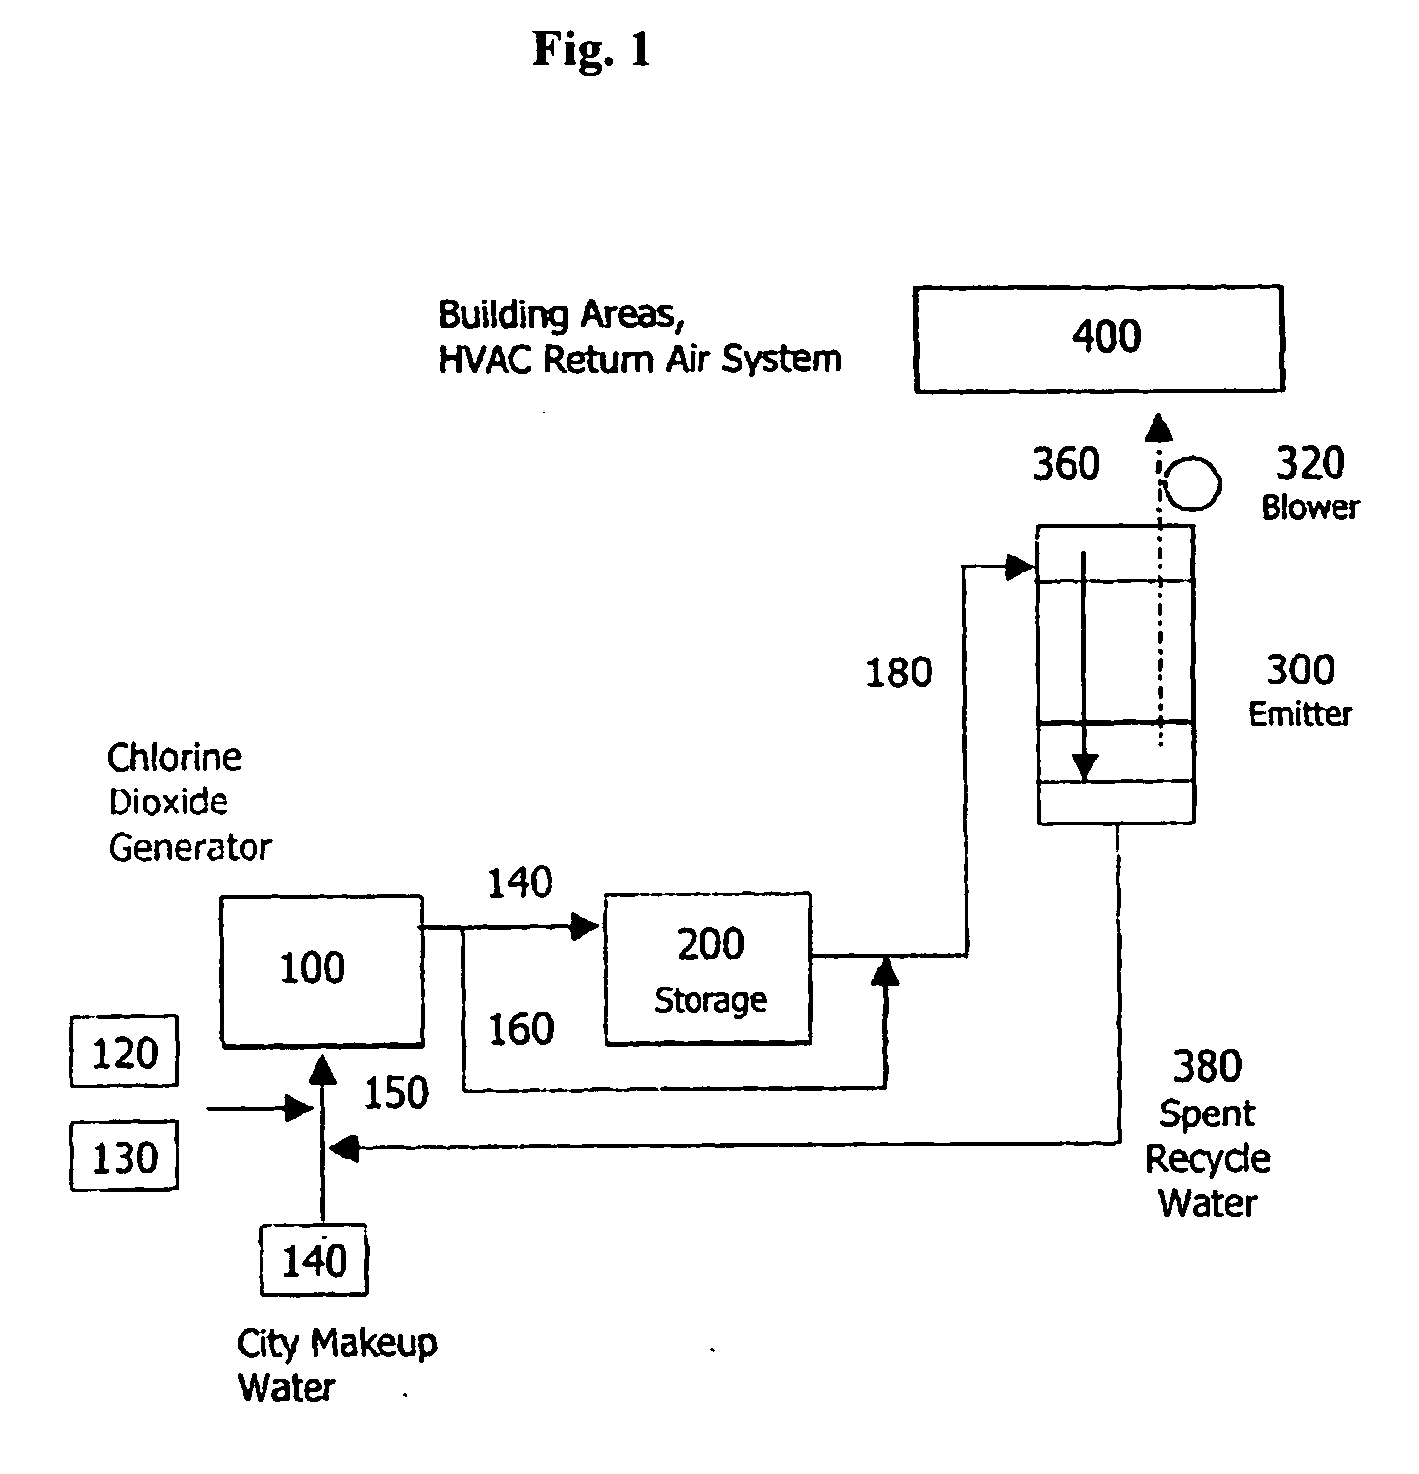 Methods of using chlorine dioxide as a fumigant